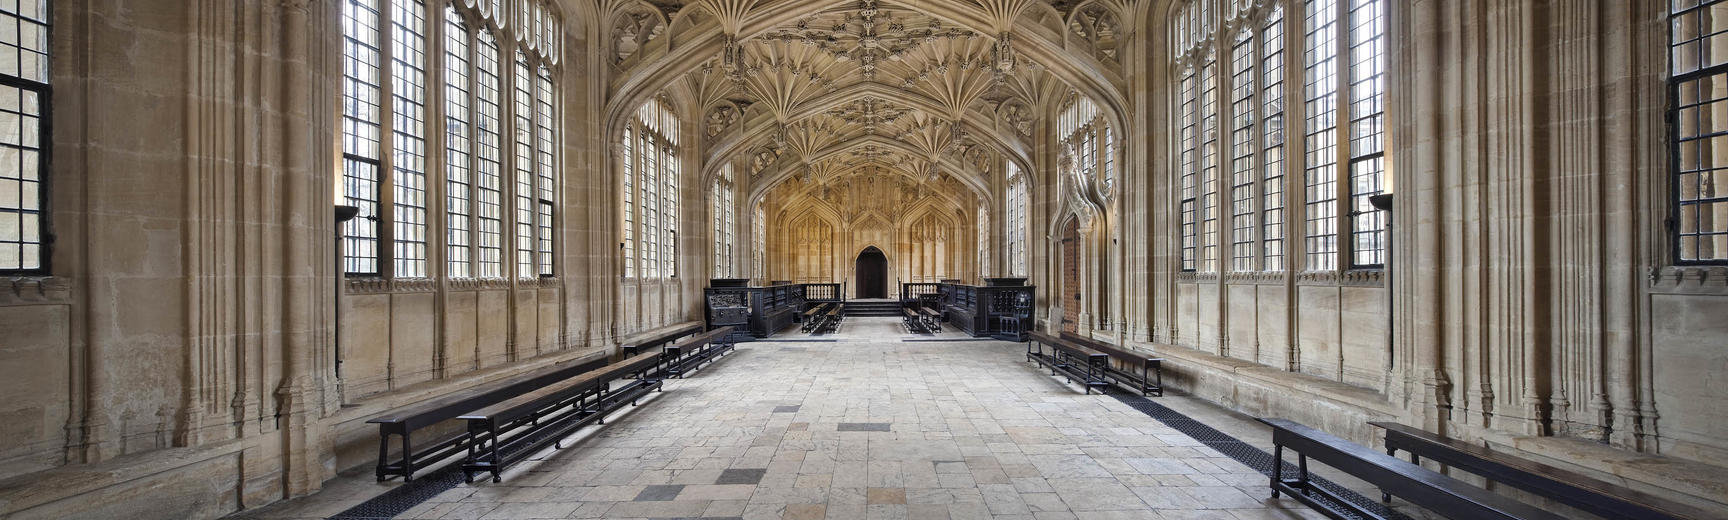 View of the Divinity School in the Bodleian Library, a 15th-century room with ornate stone ceiling carvings, a stone floor, and windows down either side of the room